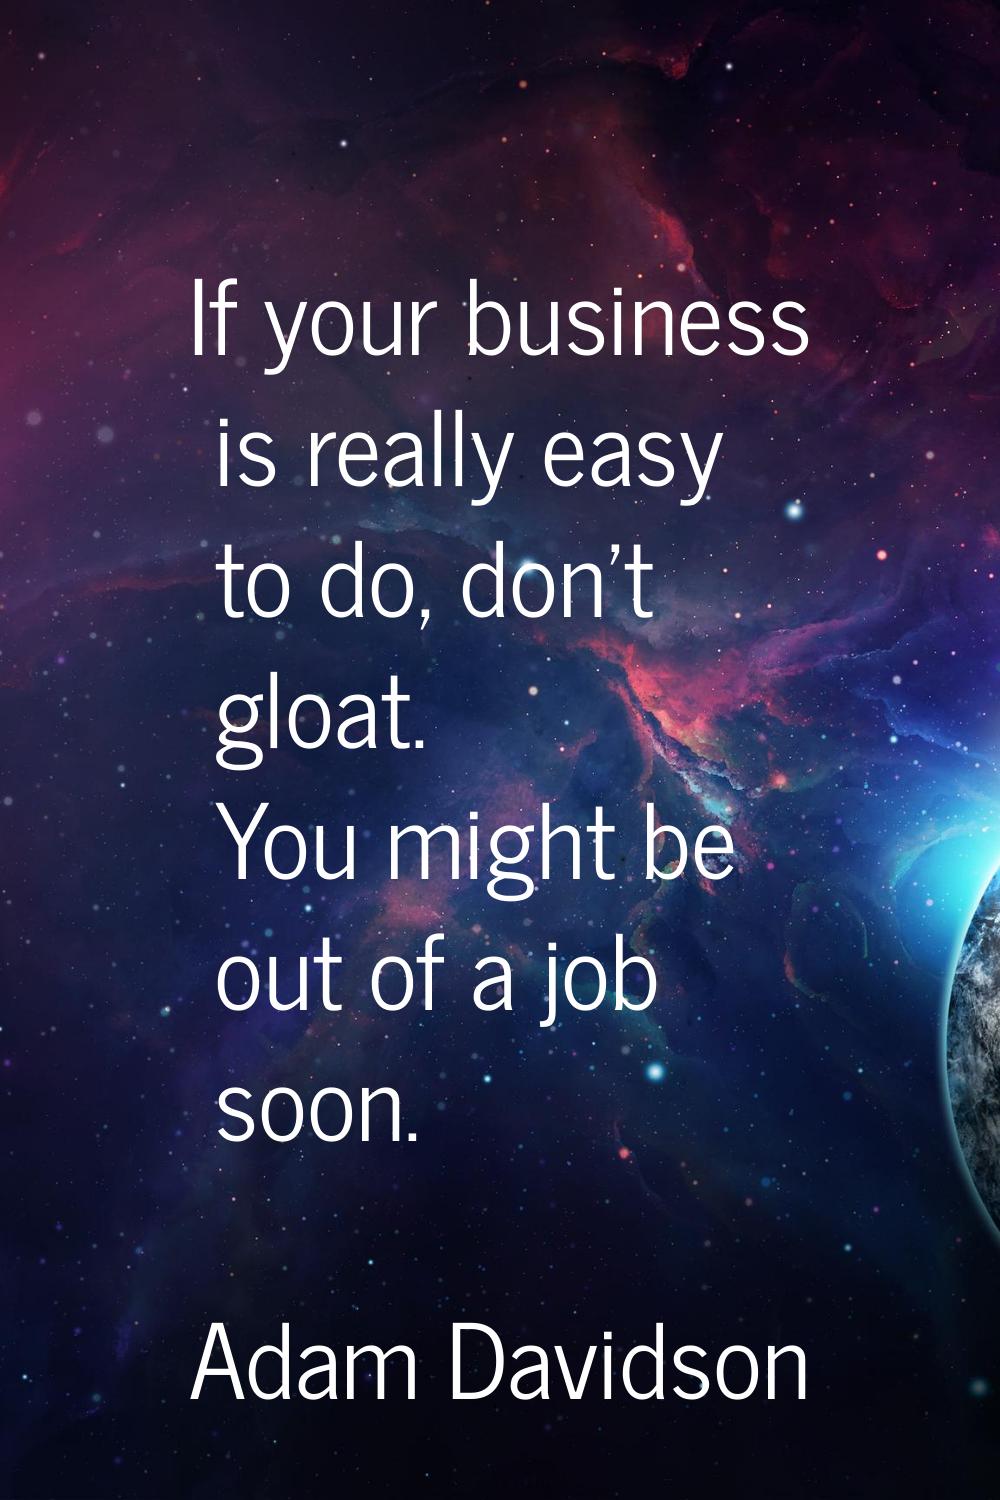 If your business is really easy to do, don't gloat. You might be out of a job soon.